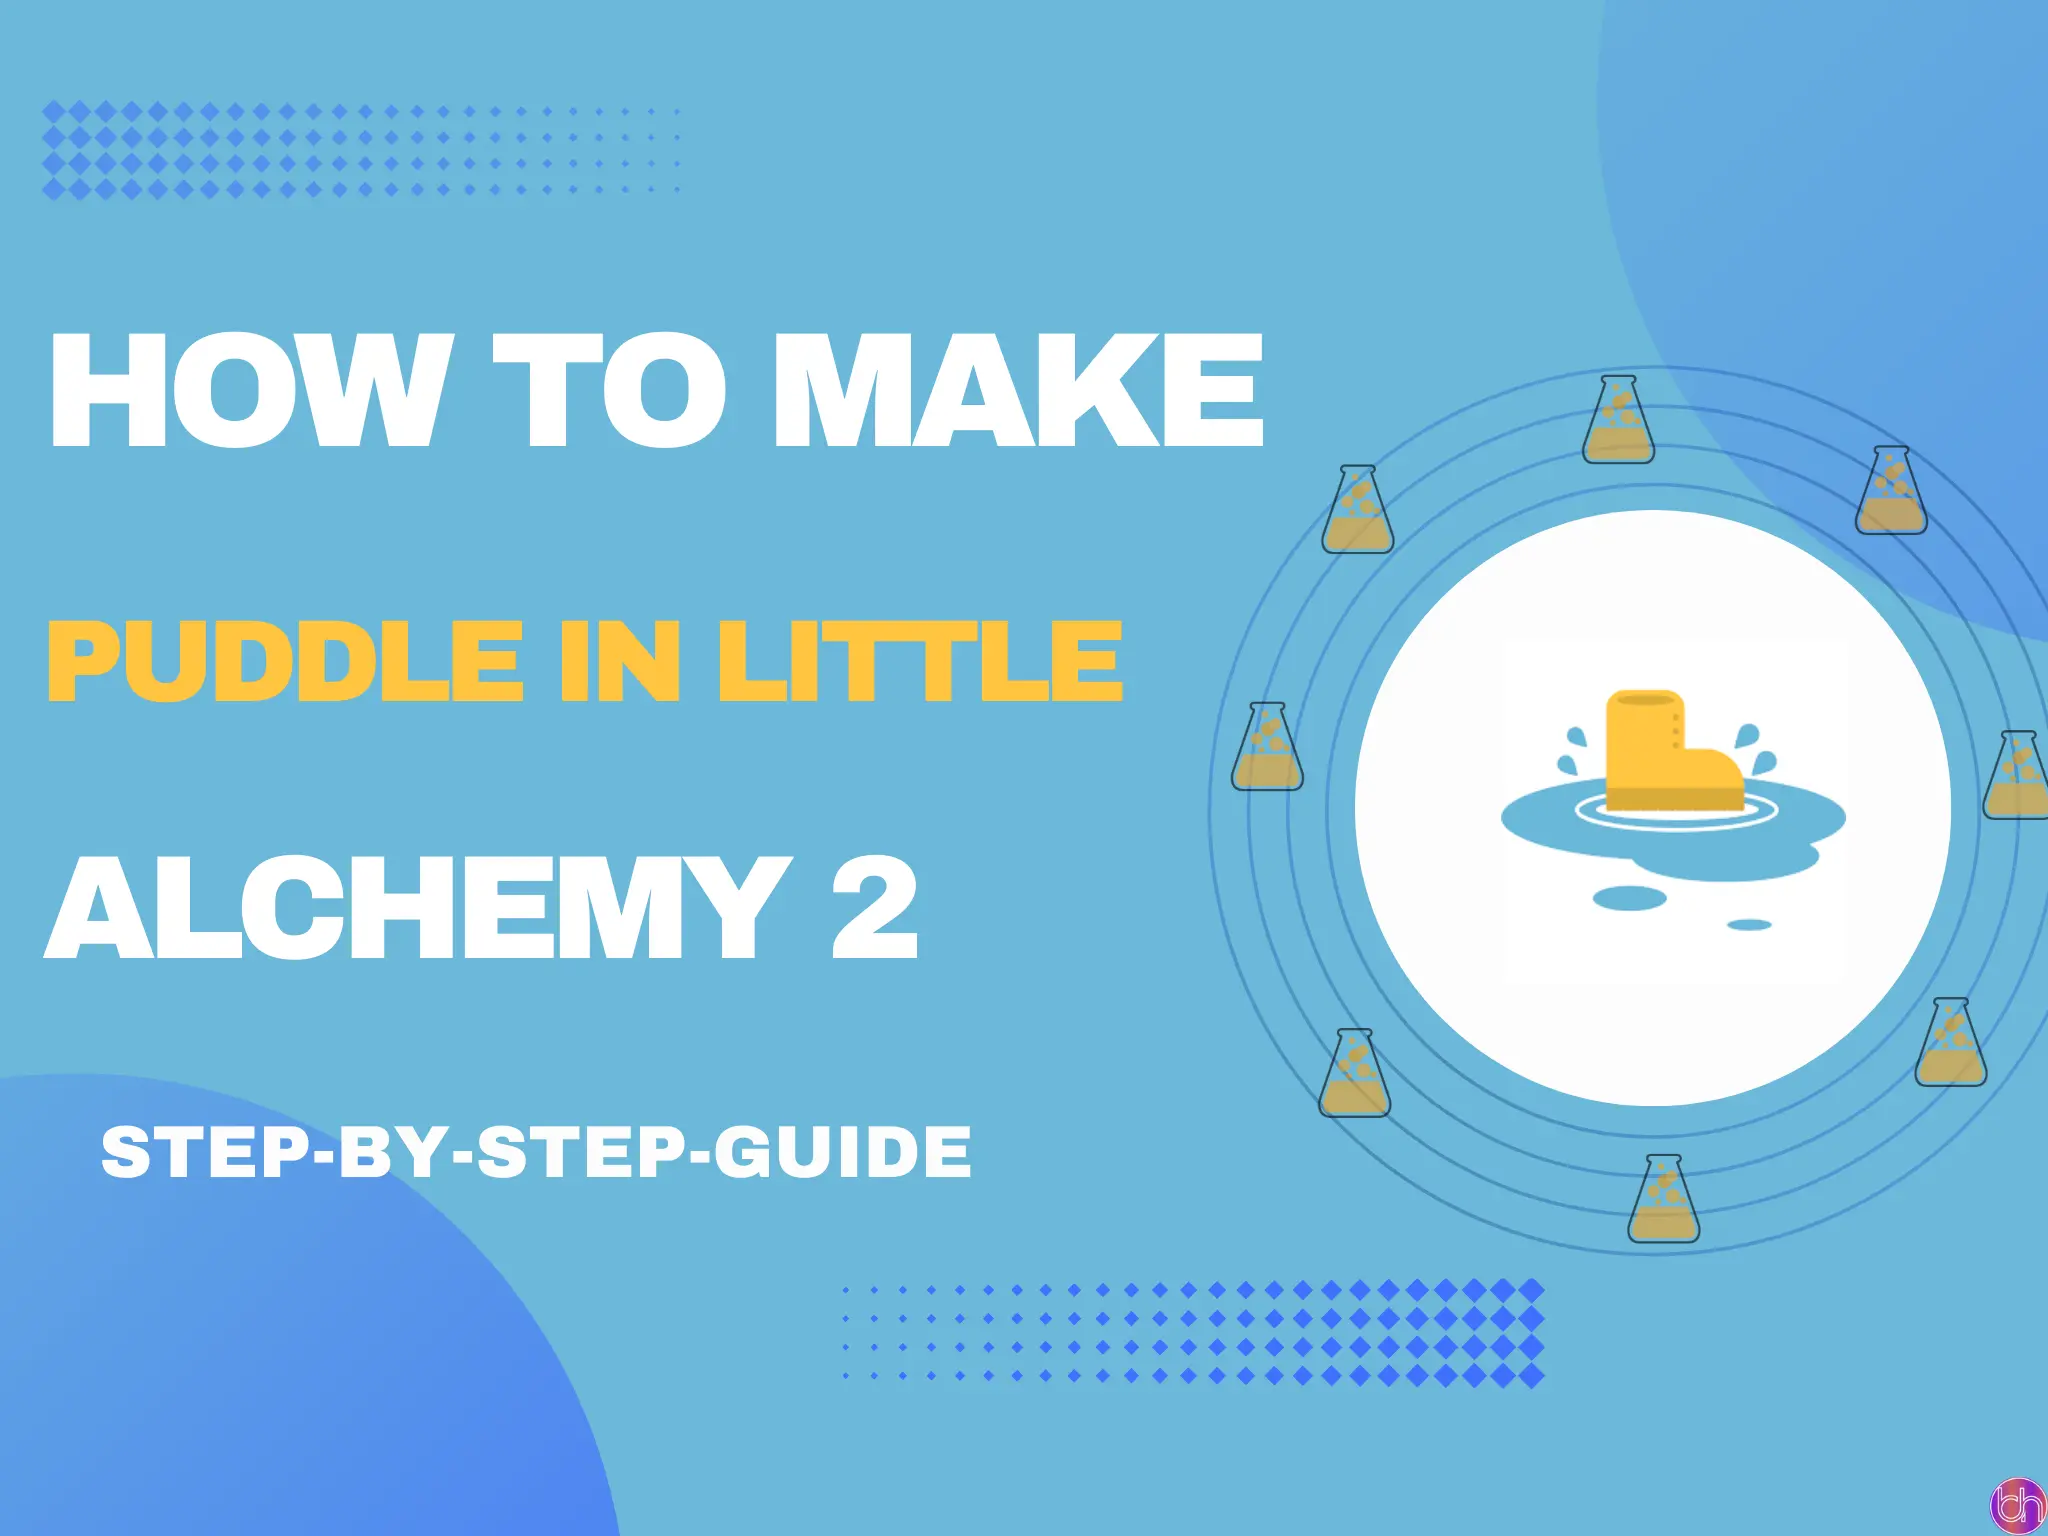 how to make puddle in little alchemy 2